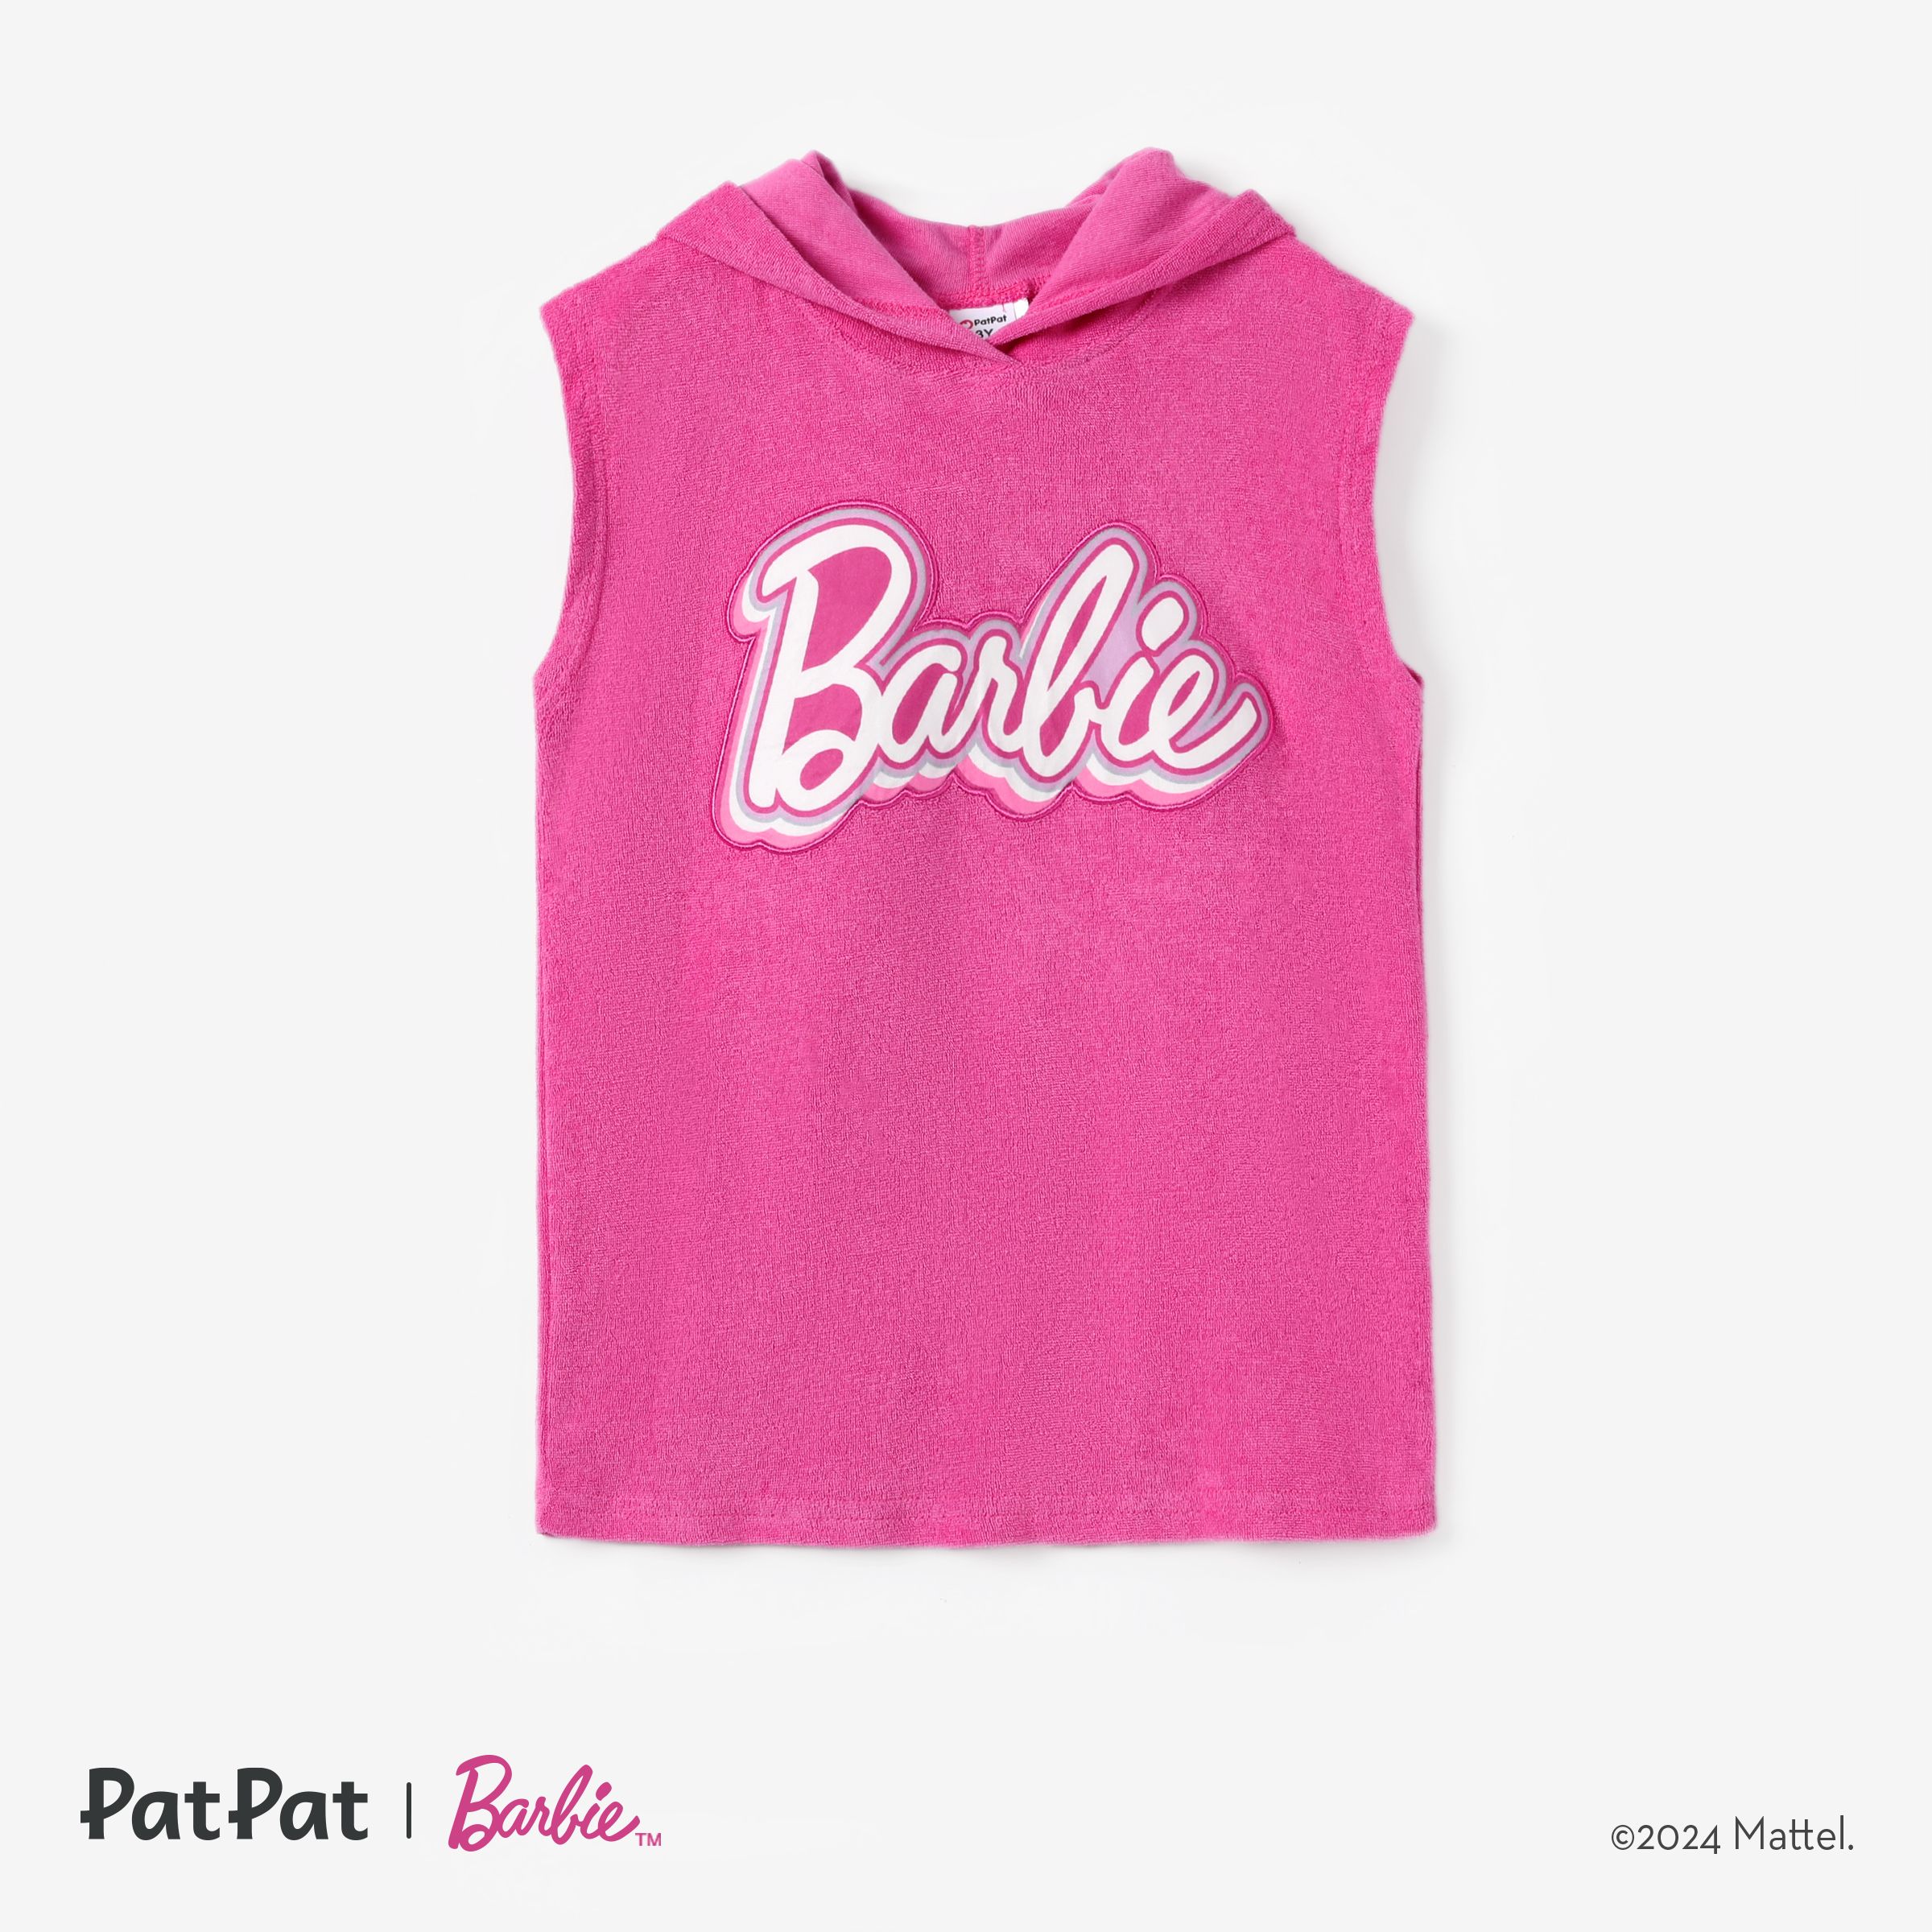 Barbie Toddler/Kids Girls 1pc Cotton Classic Logo Print Hooded Towel/Swimsuit Coverup